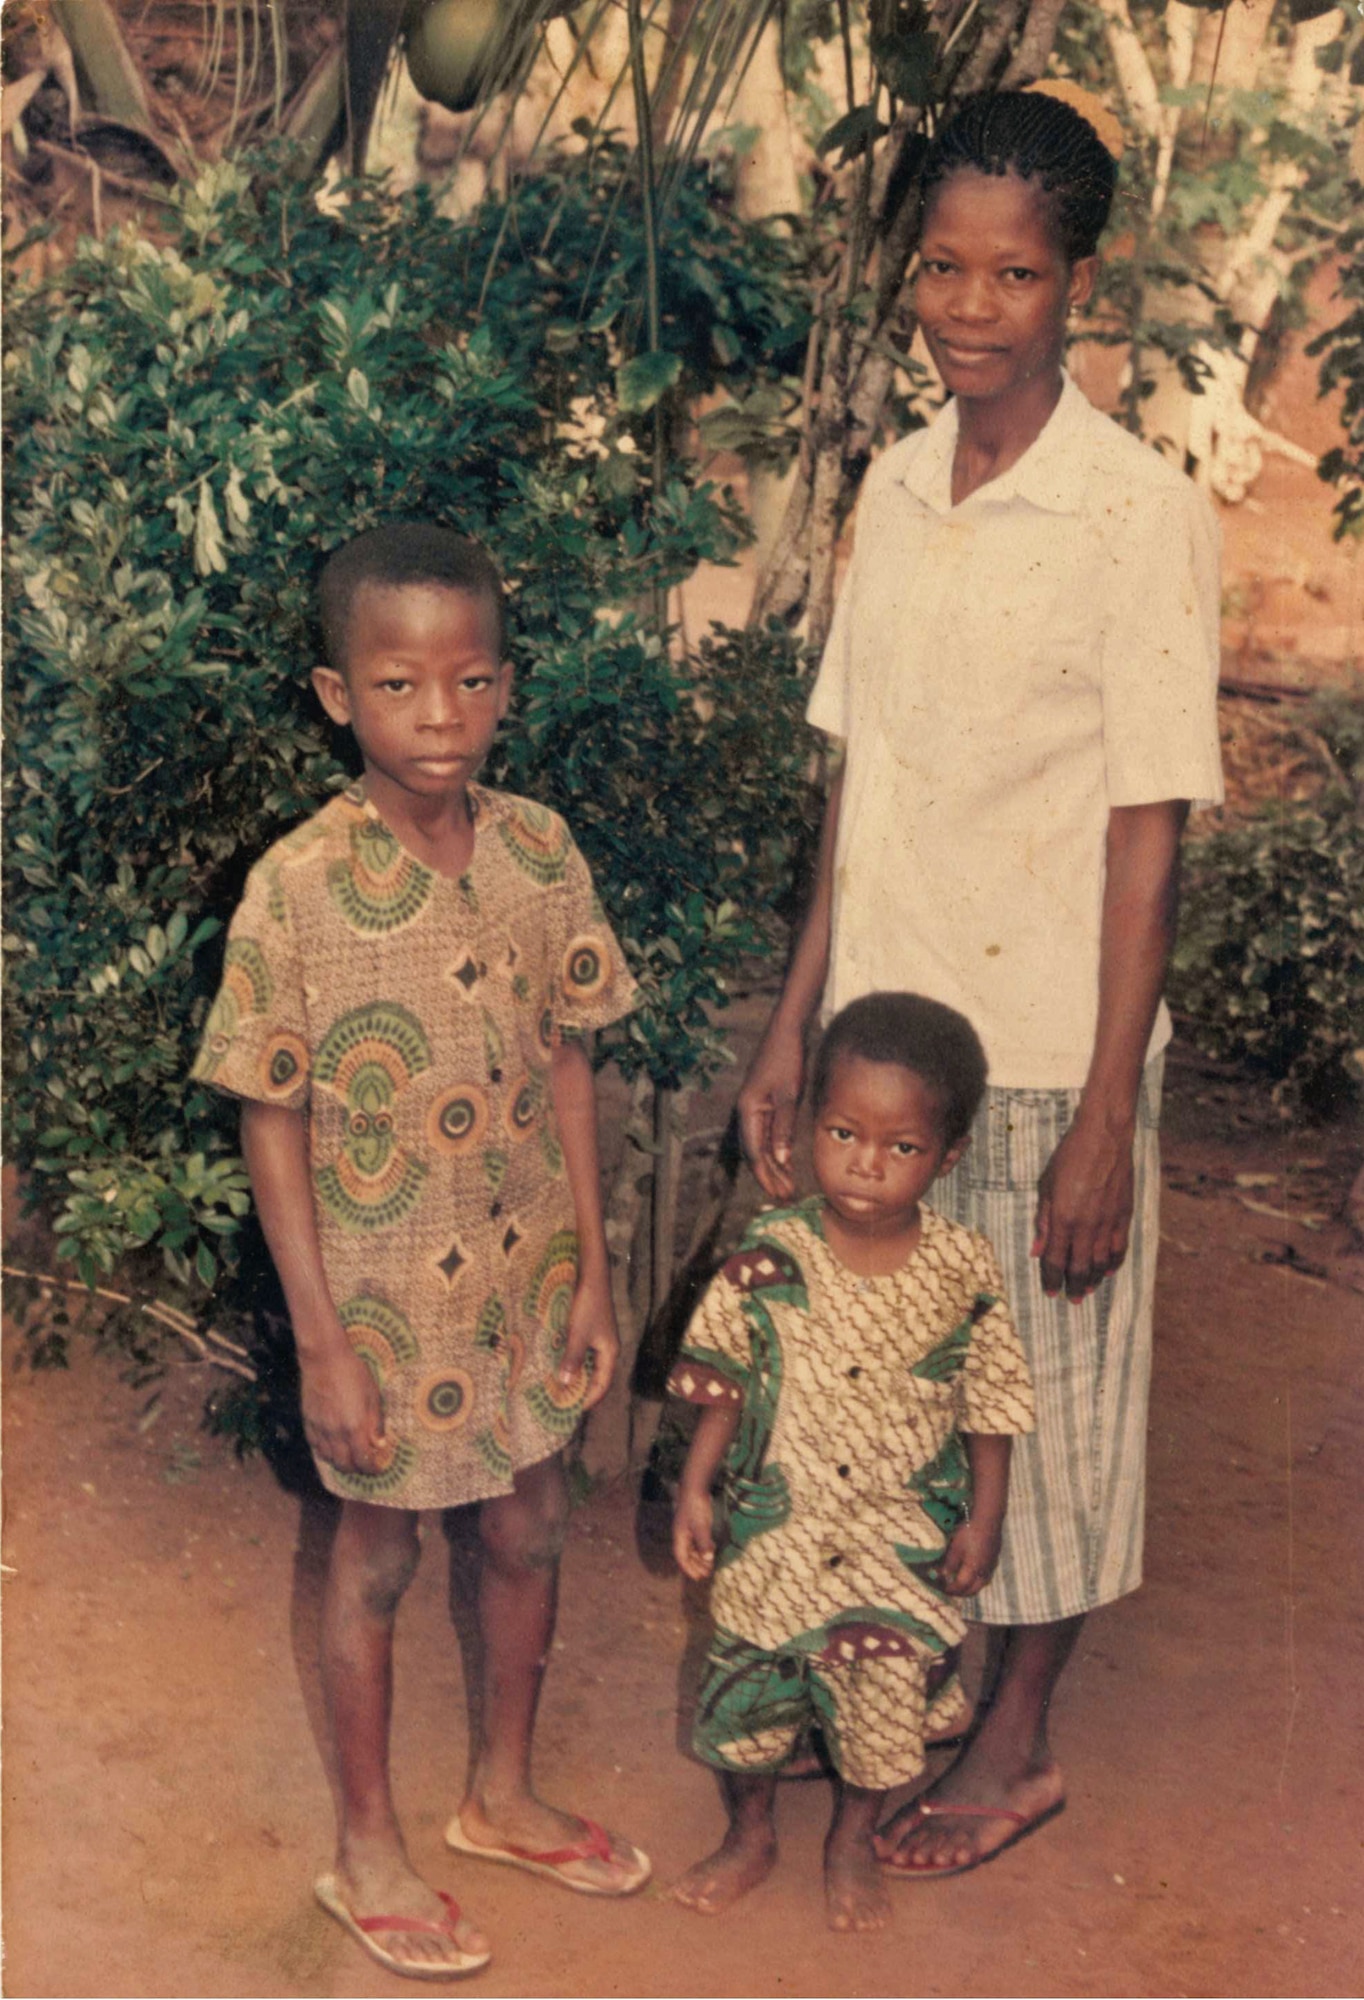 Airman 1st Class Kofi Combey Douhadji, 92nd Logistics Readiness Squadron vehicle operator, poses for a photo with his mother and younger brother in Togo, West Africa. Douhadji started reading about American culture and history as a young man in Togo, slowly learning about the English language and life in America. (Courtesy Photo)